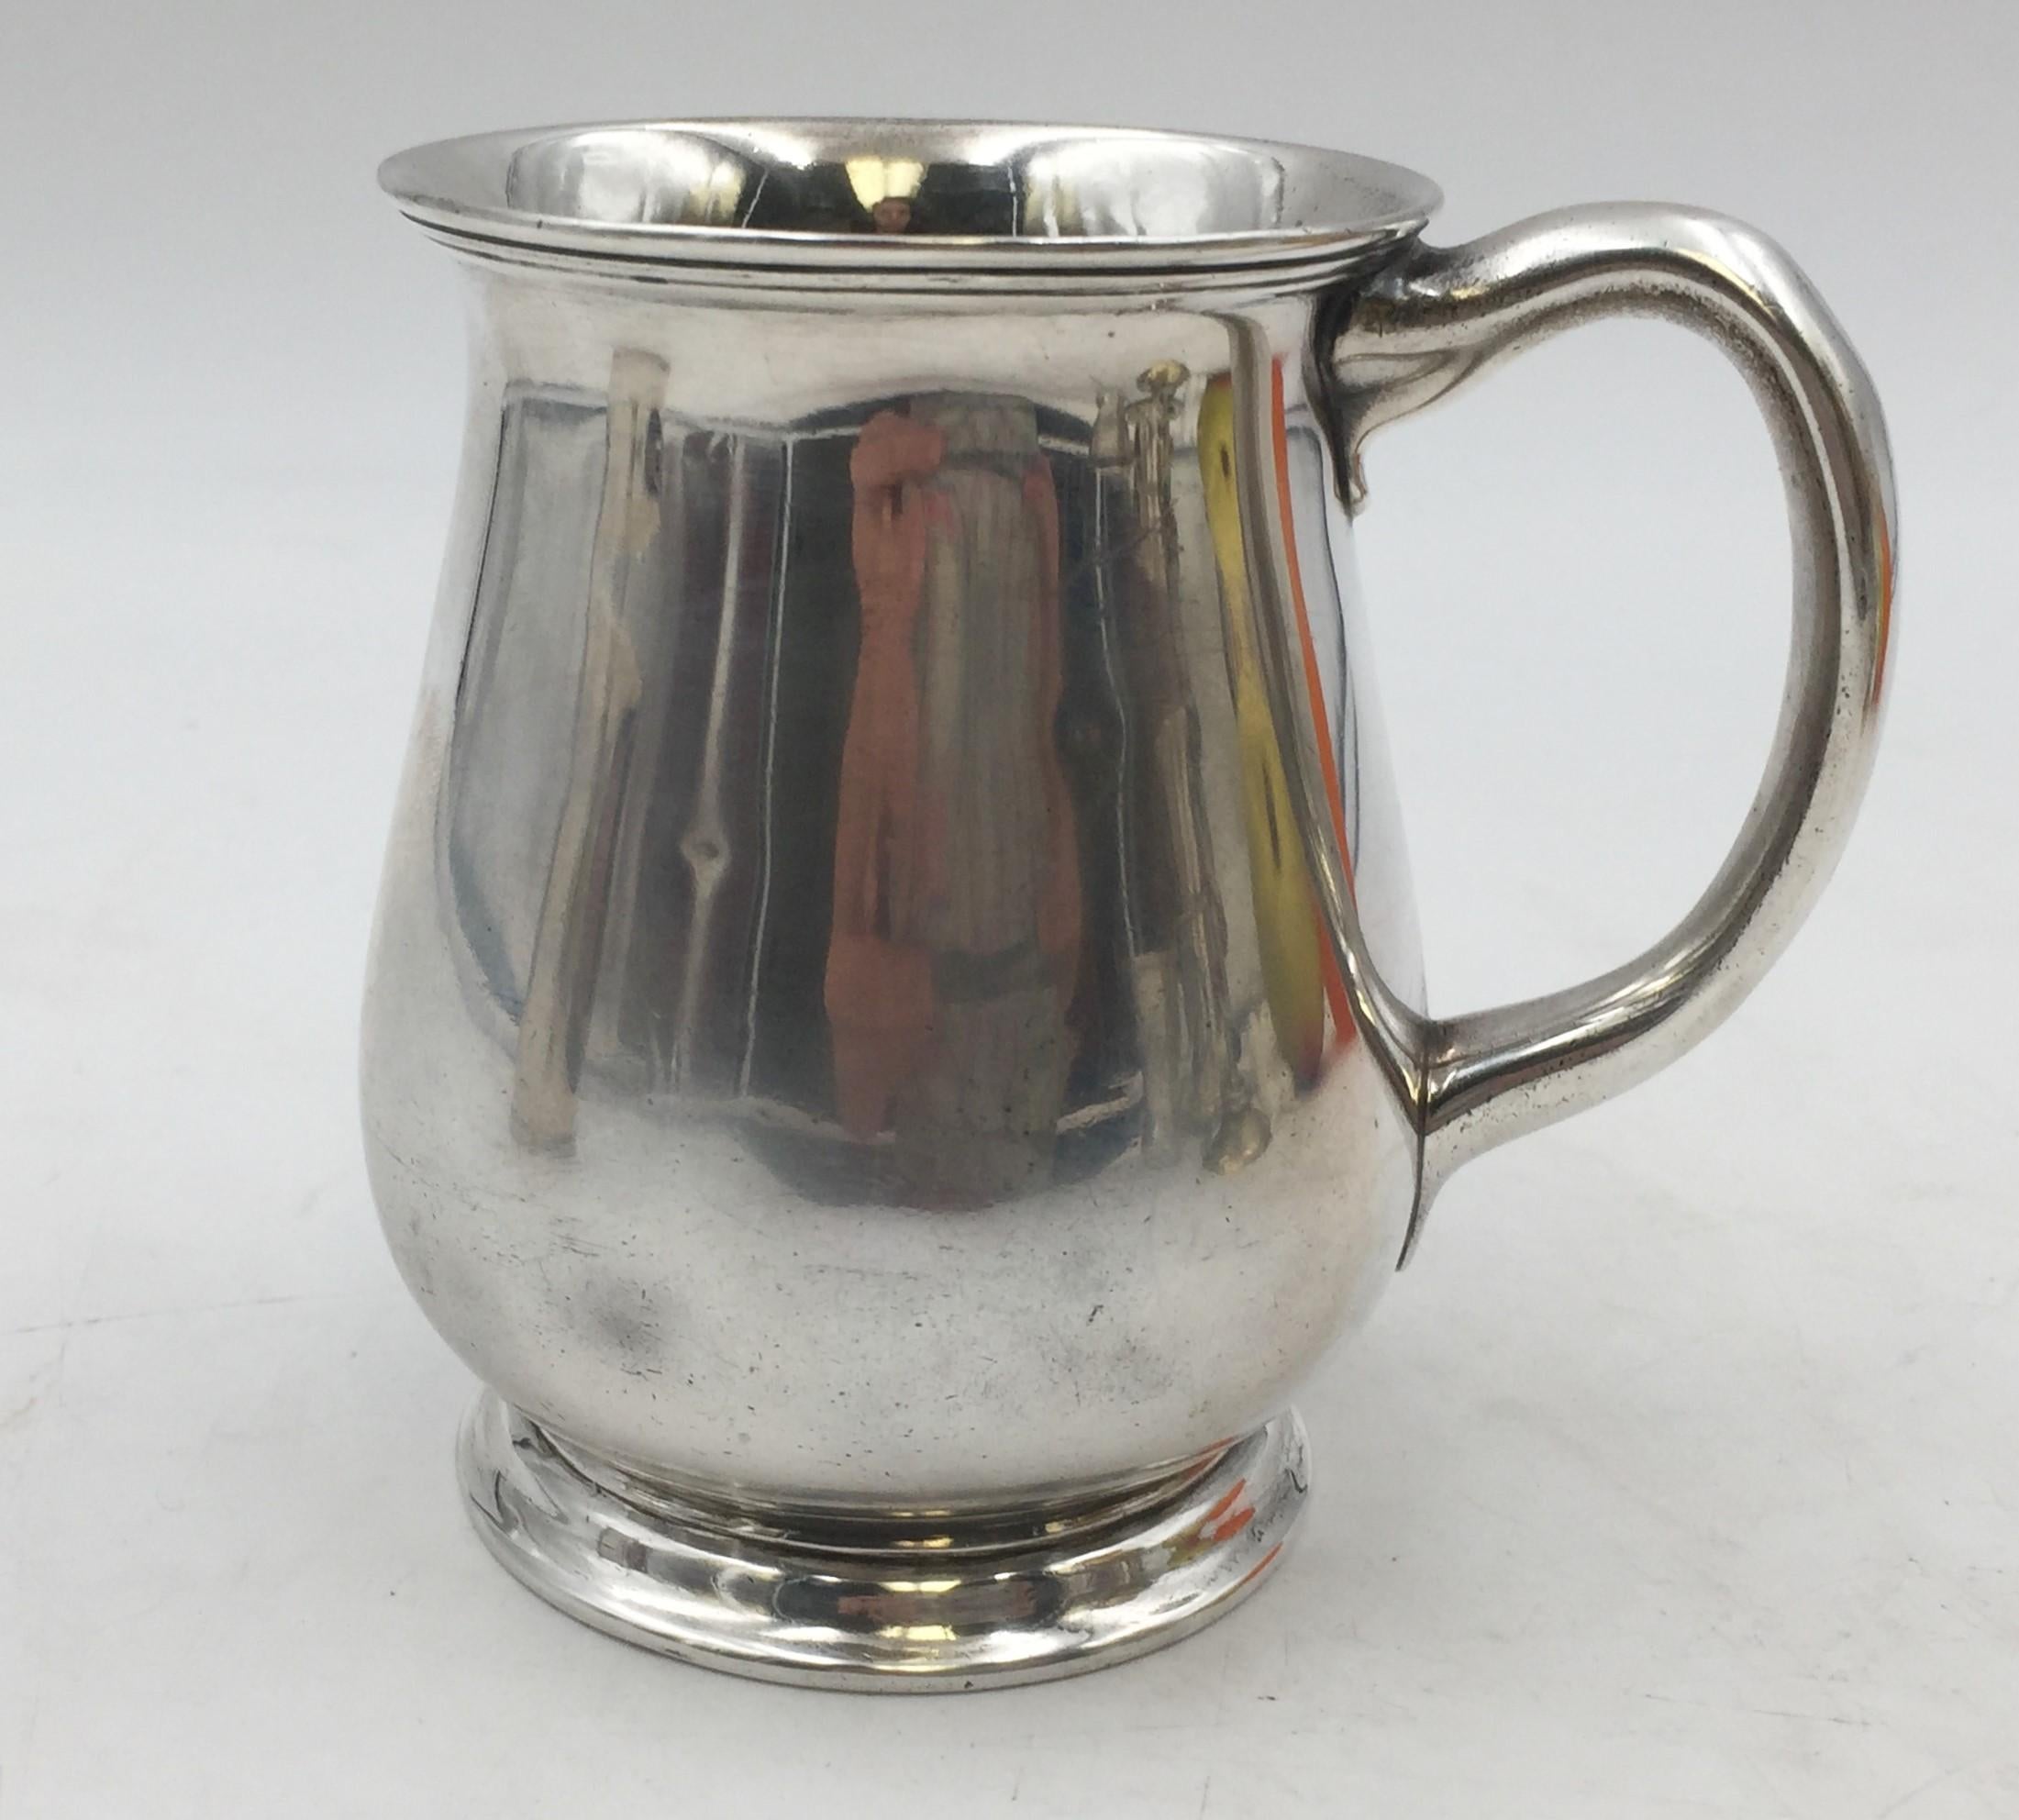 Tiffany & Co. sterling silver christening cup / child mug in pattern 16088 from 1904 in simple, elegant design, measuring 3 7/8'' in height and 3 3/4'' from handle to cup, weighing 5.7 ozt, and bearing hallmarks as shown.

Founded in 1837 by